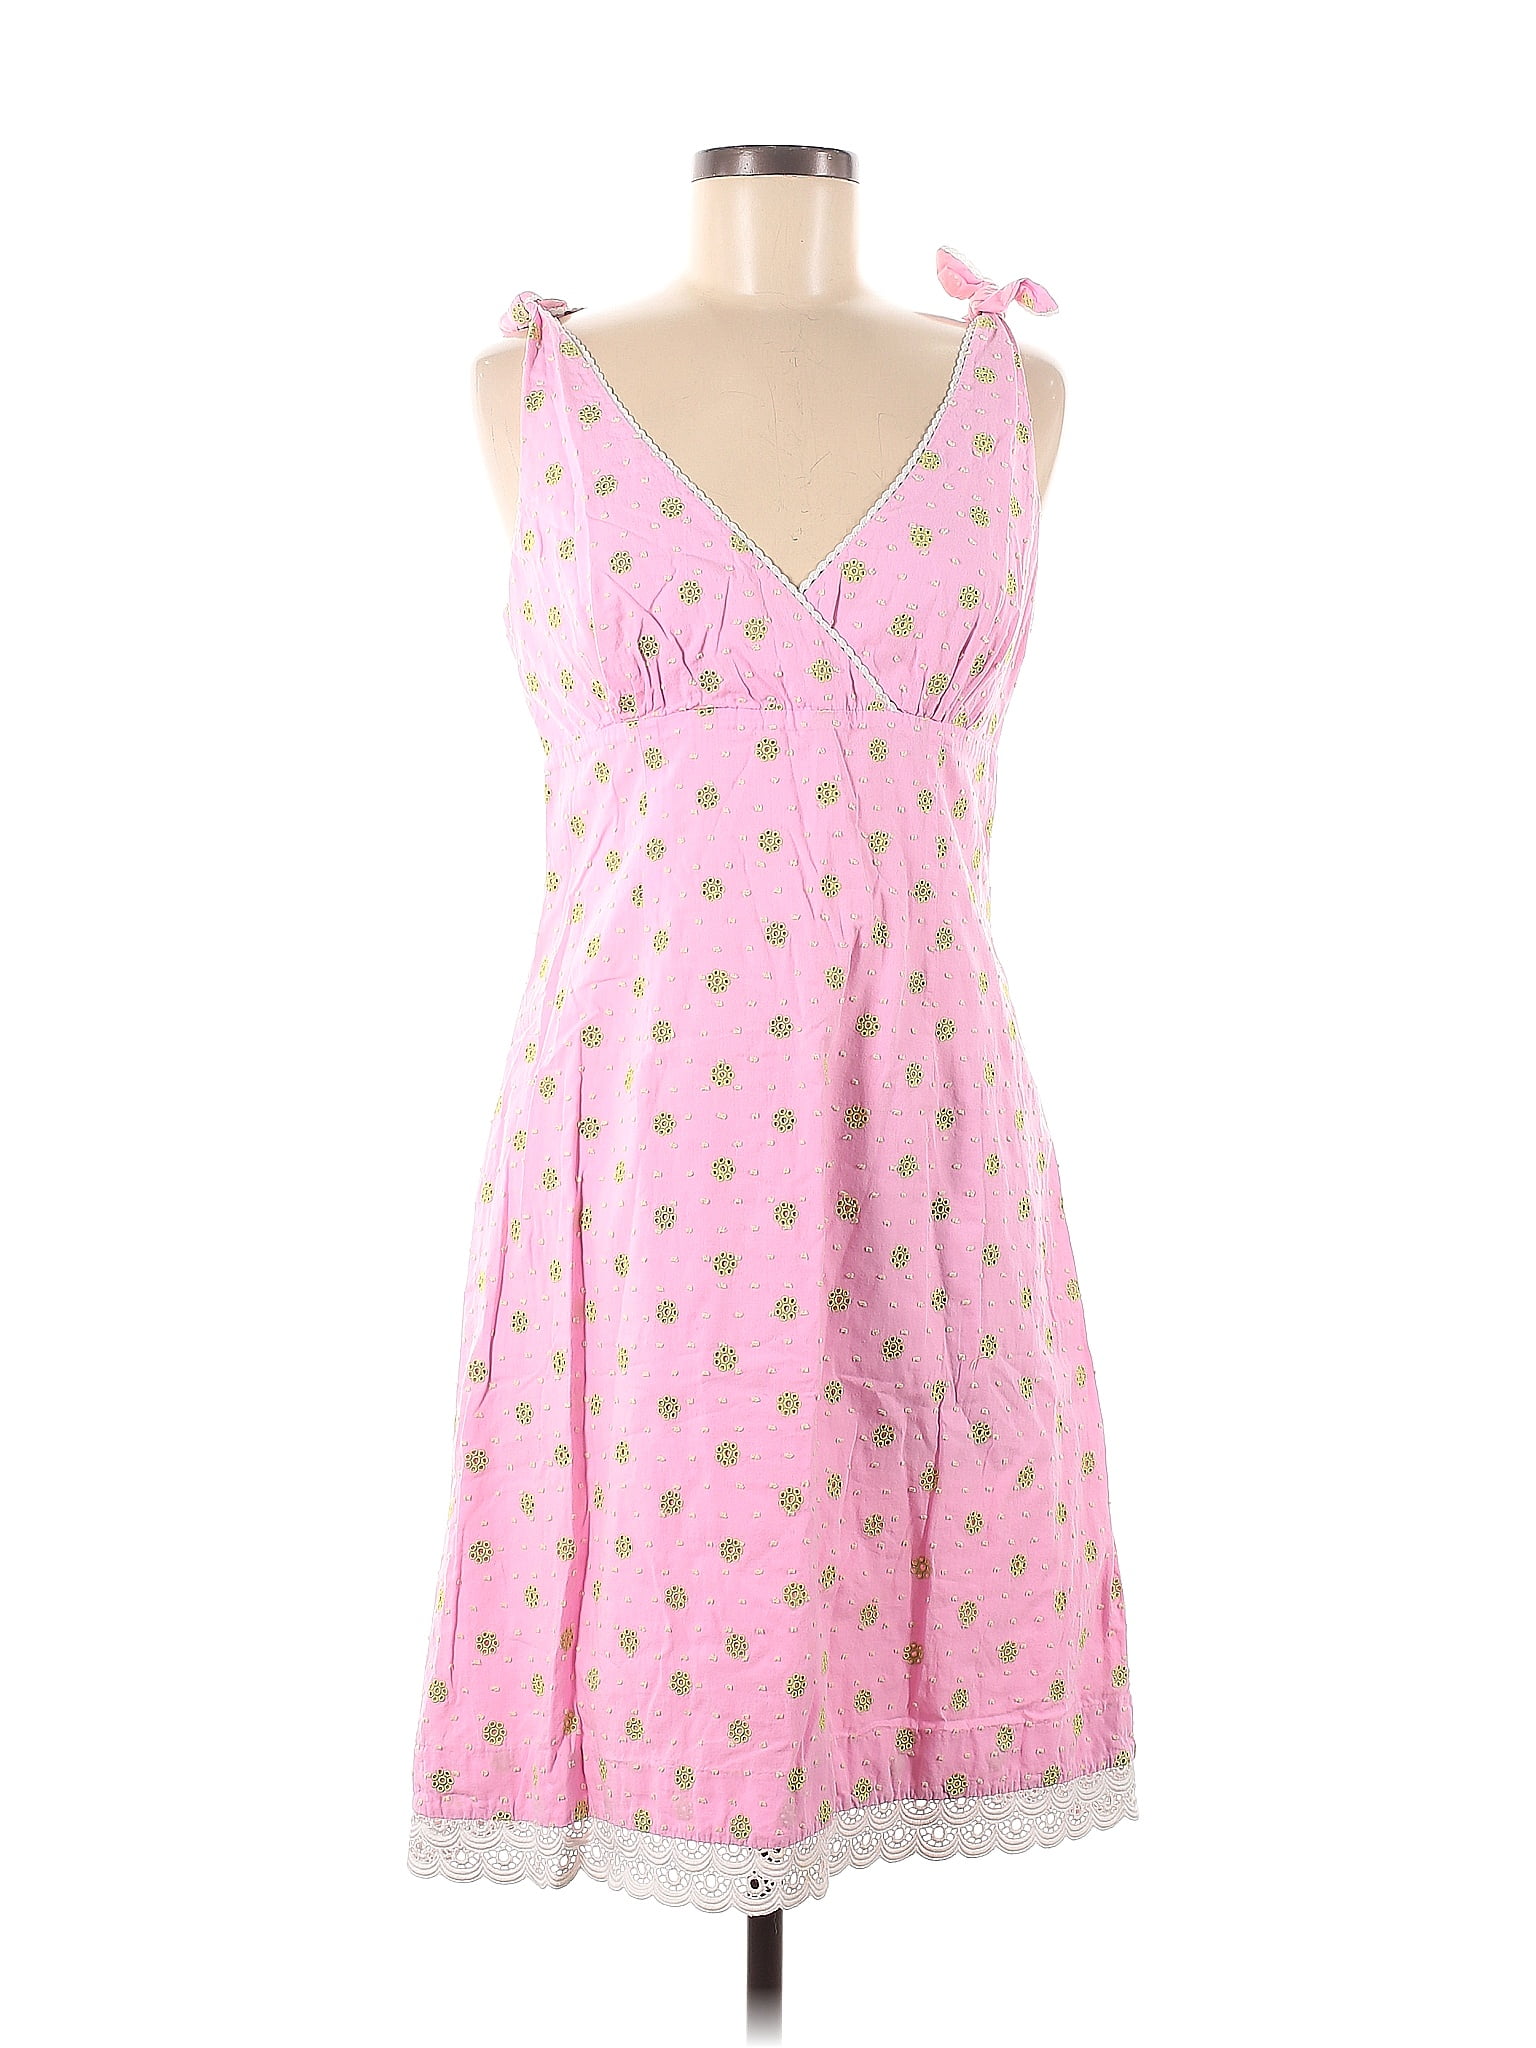 Lilly Pulitzer 100 Cotton Polka Dots Pink Casual Dress Size 10 68